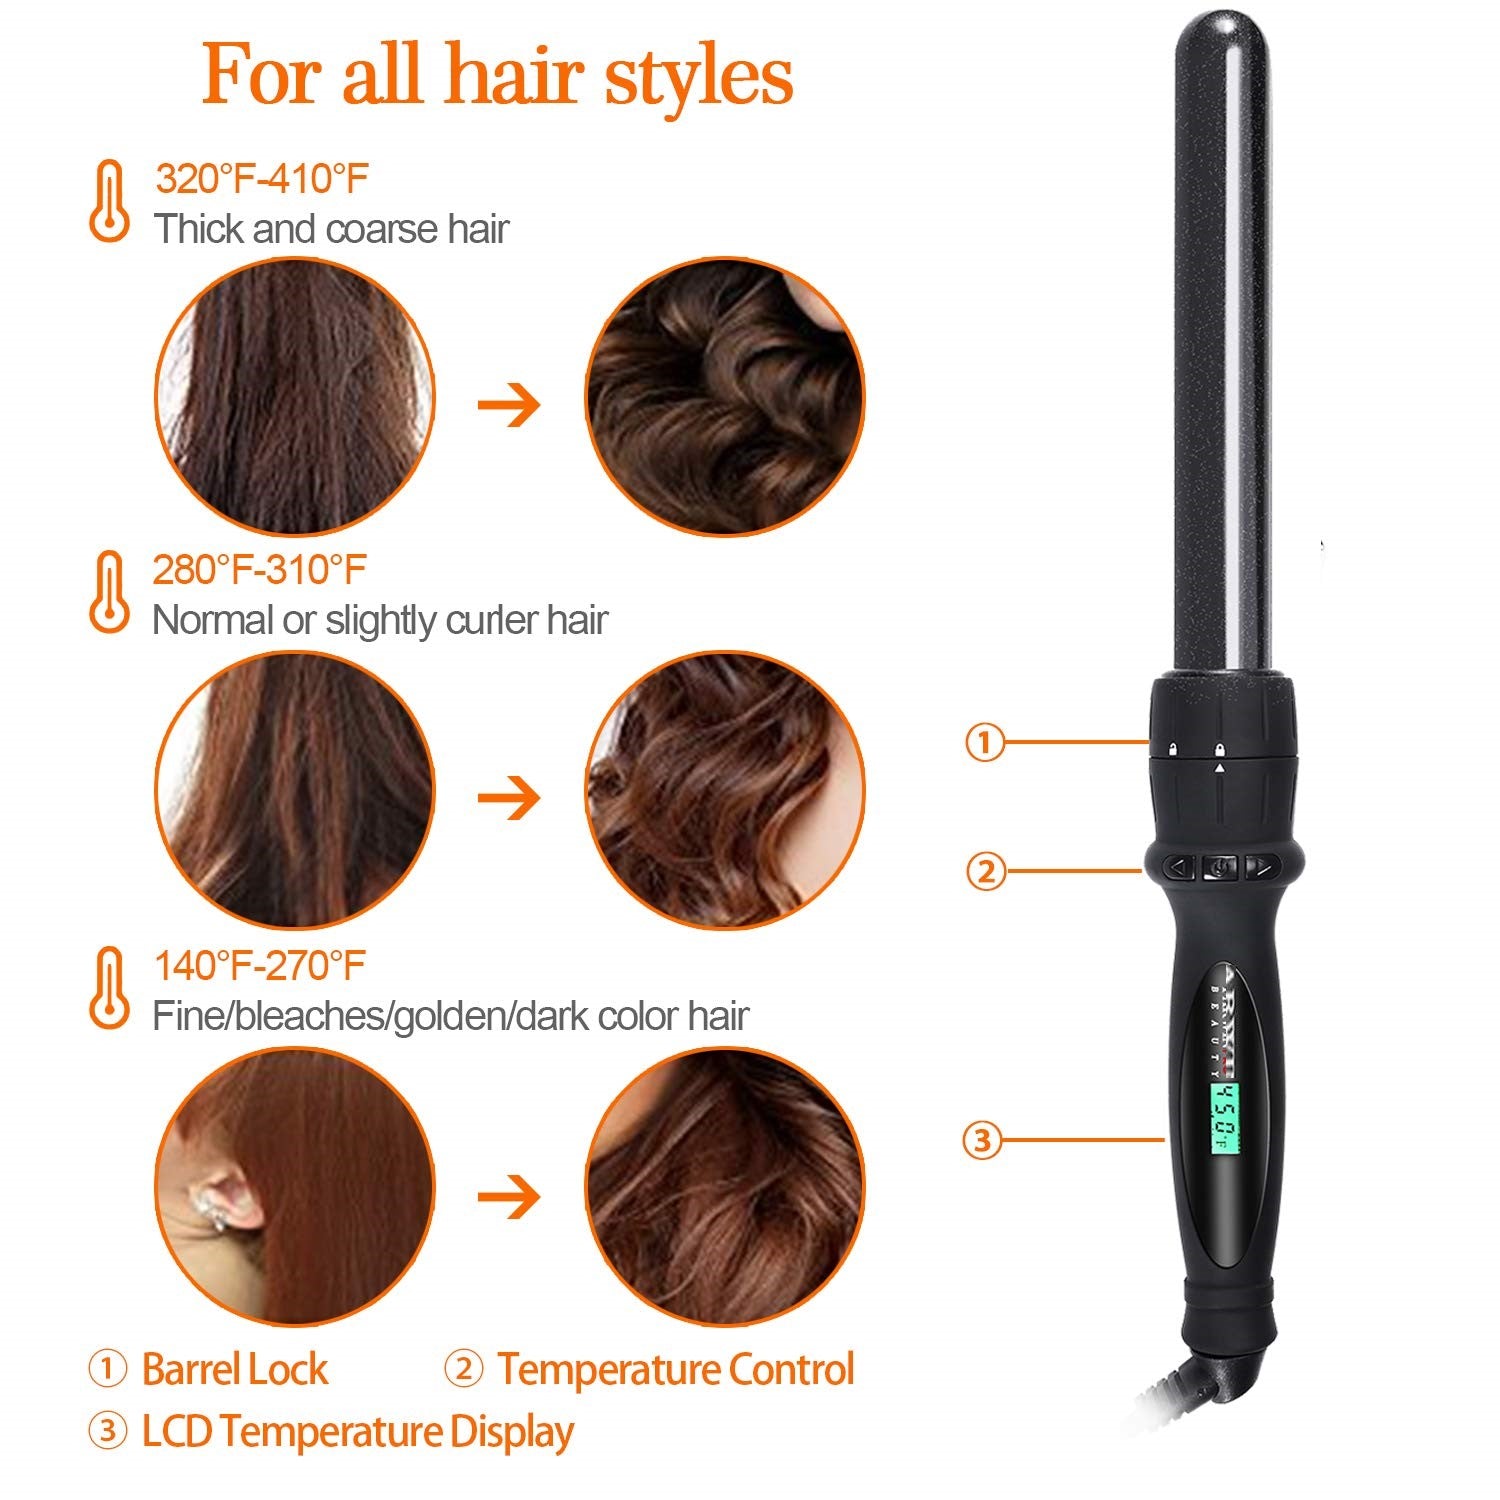 7 in 1 Curling iron set with interchangable barrles | Ceramic Curling Iron Set - Brilliance New York Online